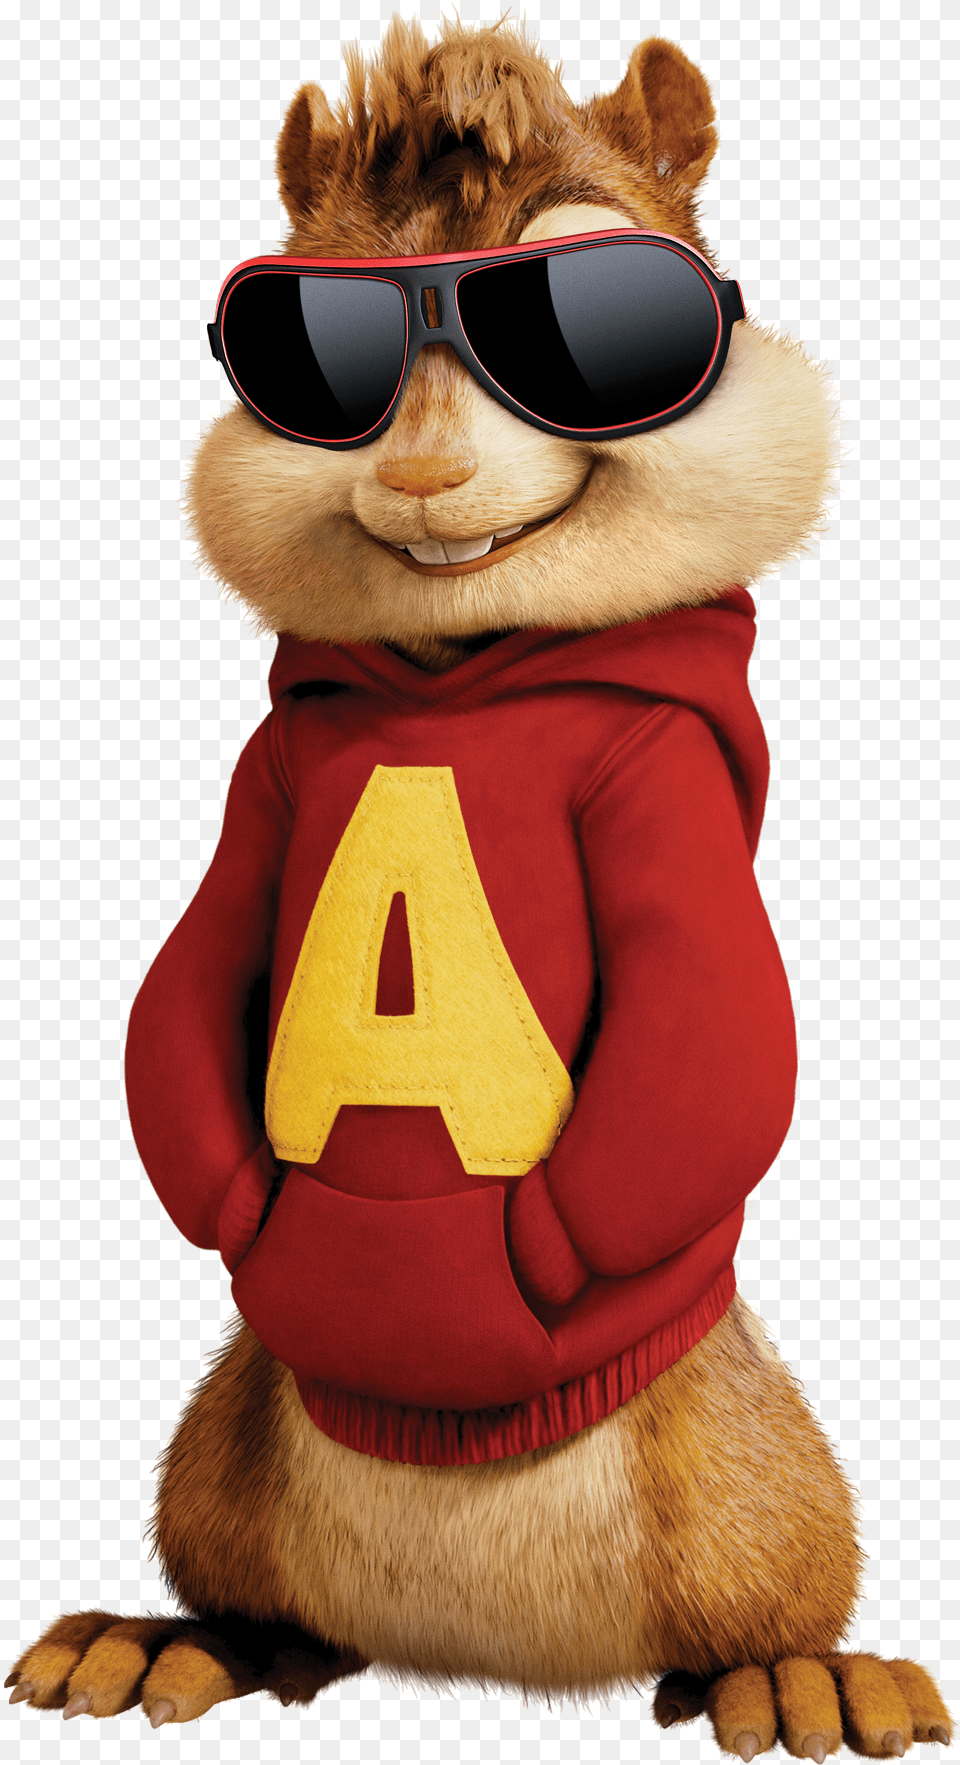 Images Alvin And The Chipmunks Chipmunks Alvin And The Chipmunks Selfie, Accessories, Sunglasses, Baby, Person Free Png Download